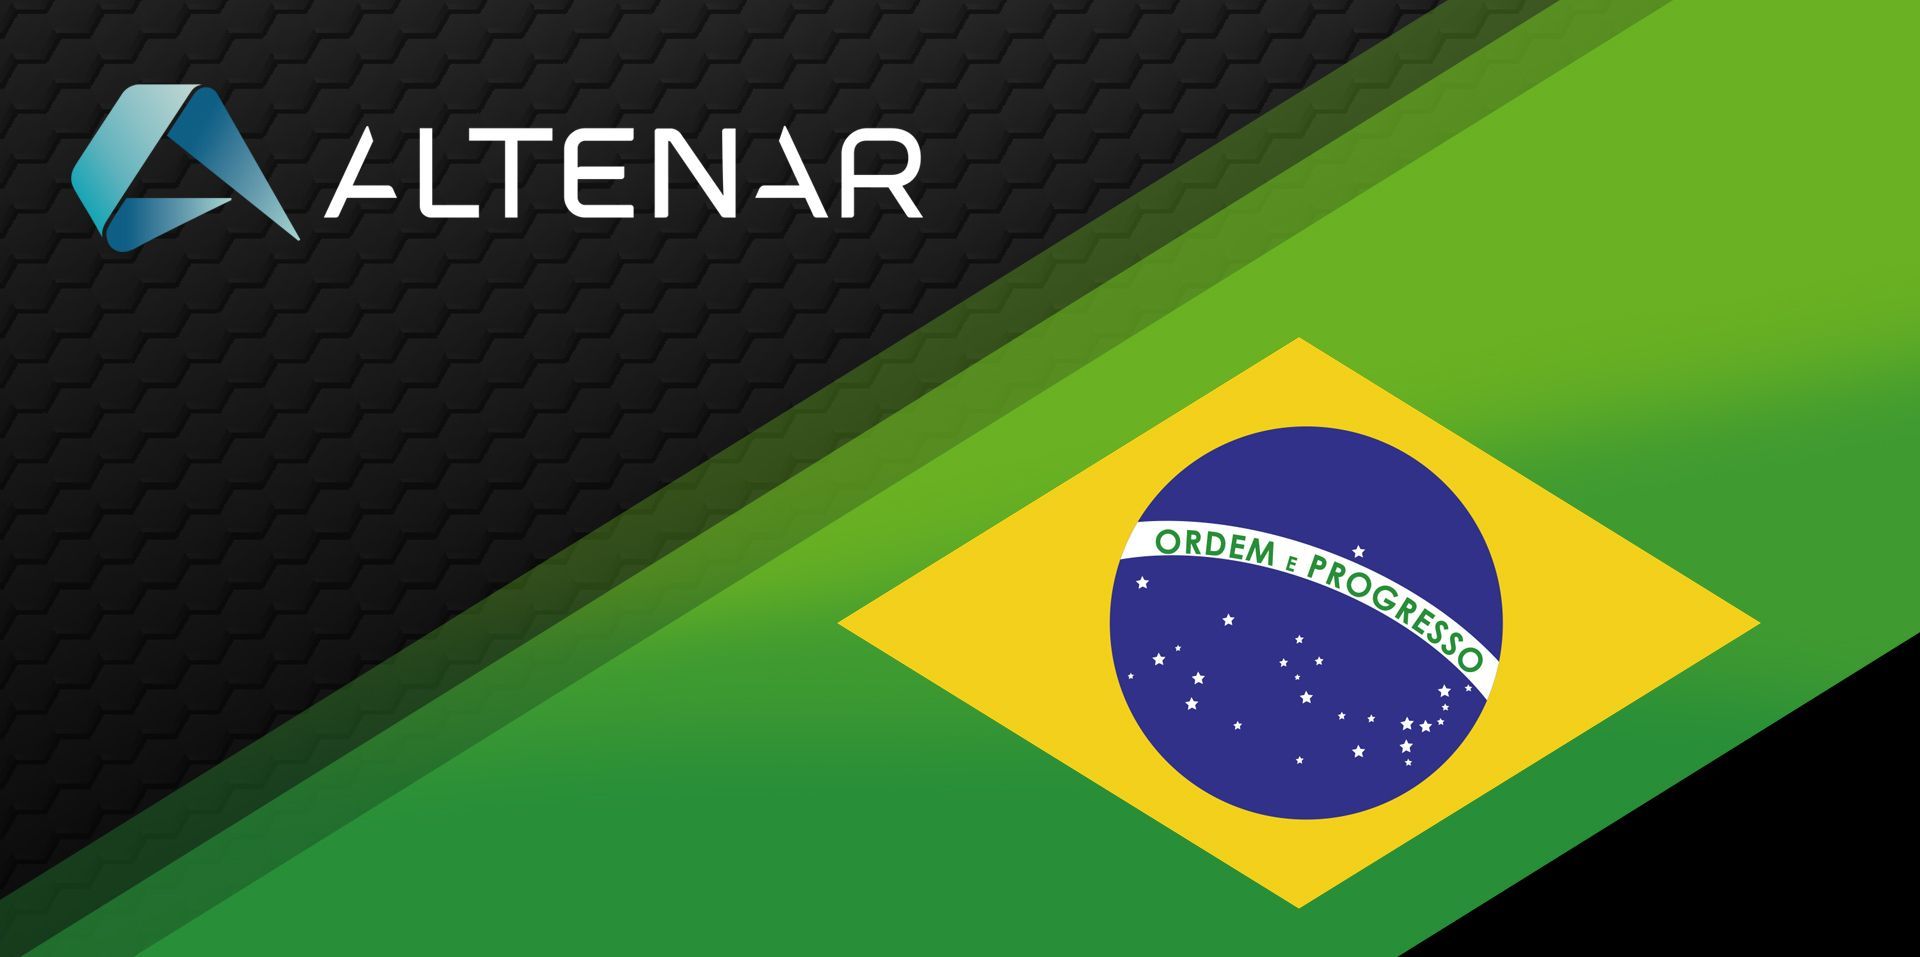 Could The Brazilian Market Expand Post-Regulatory Legalisation With The Likes Of Altenar?